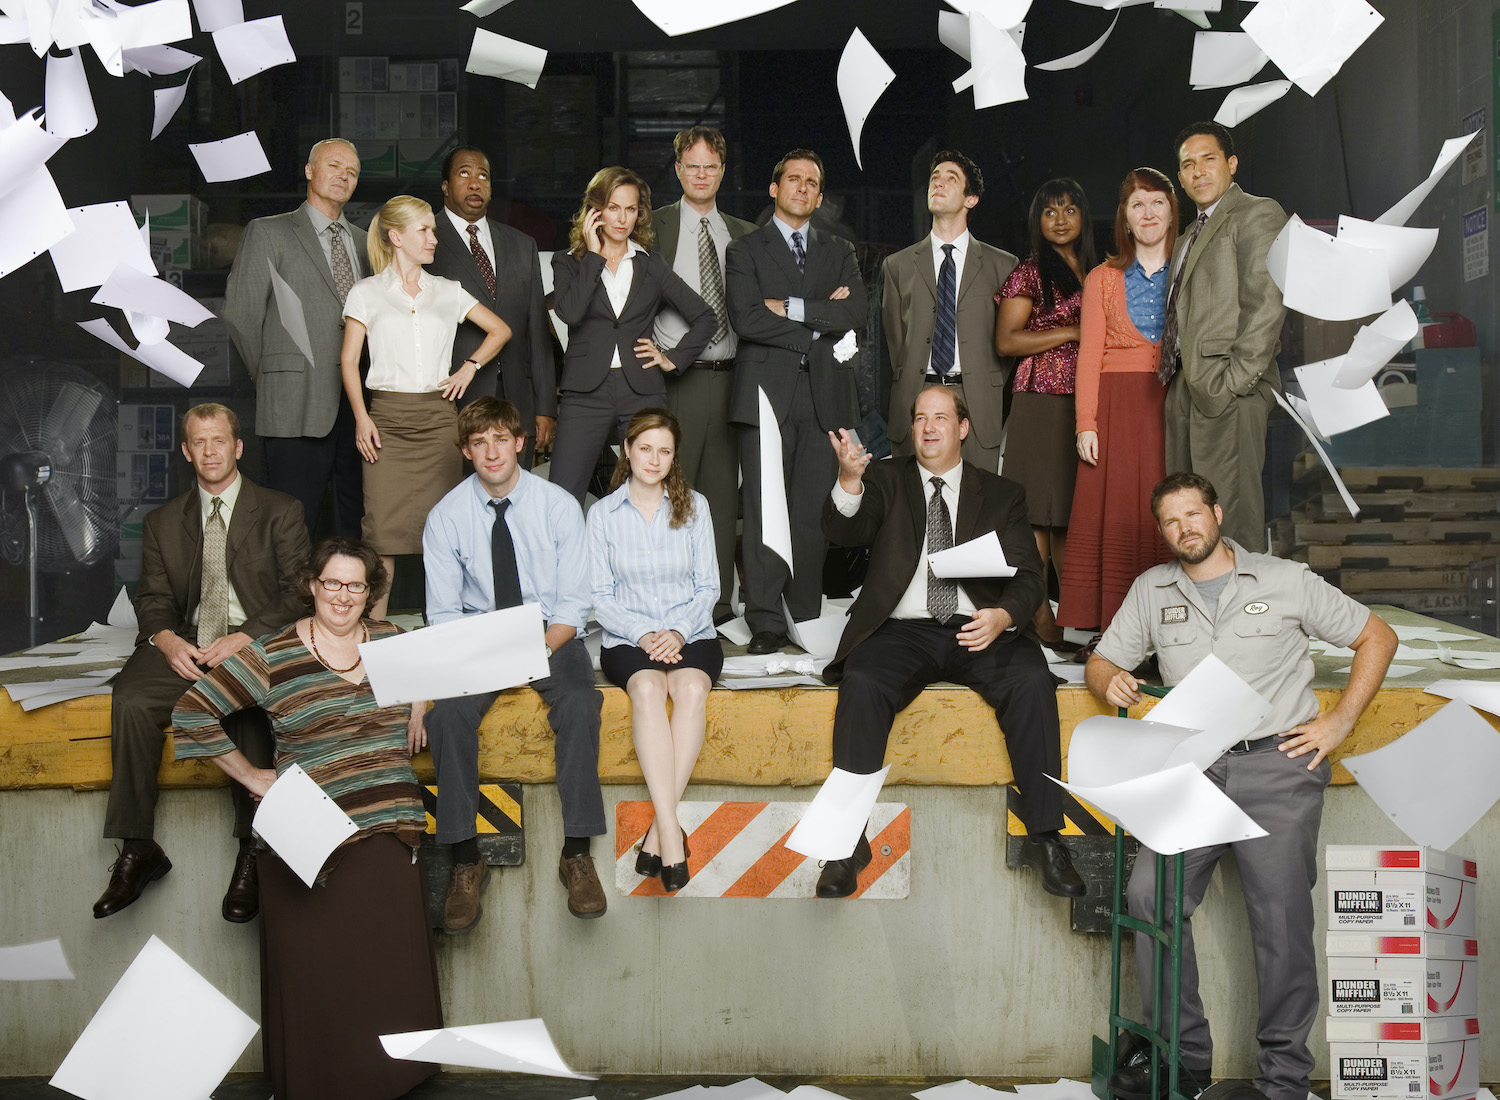 The cast of 'The Office' pose in character and paper falls from above.